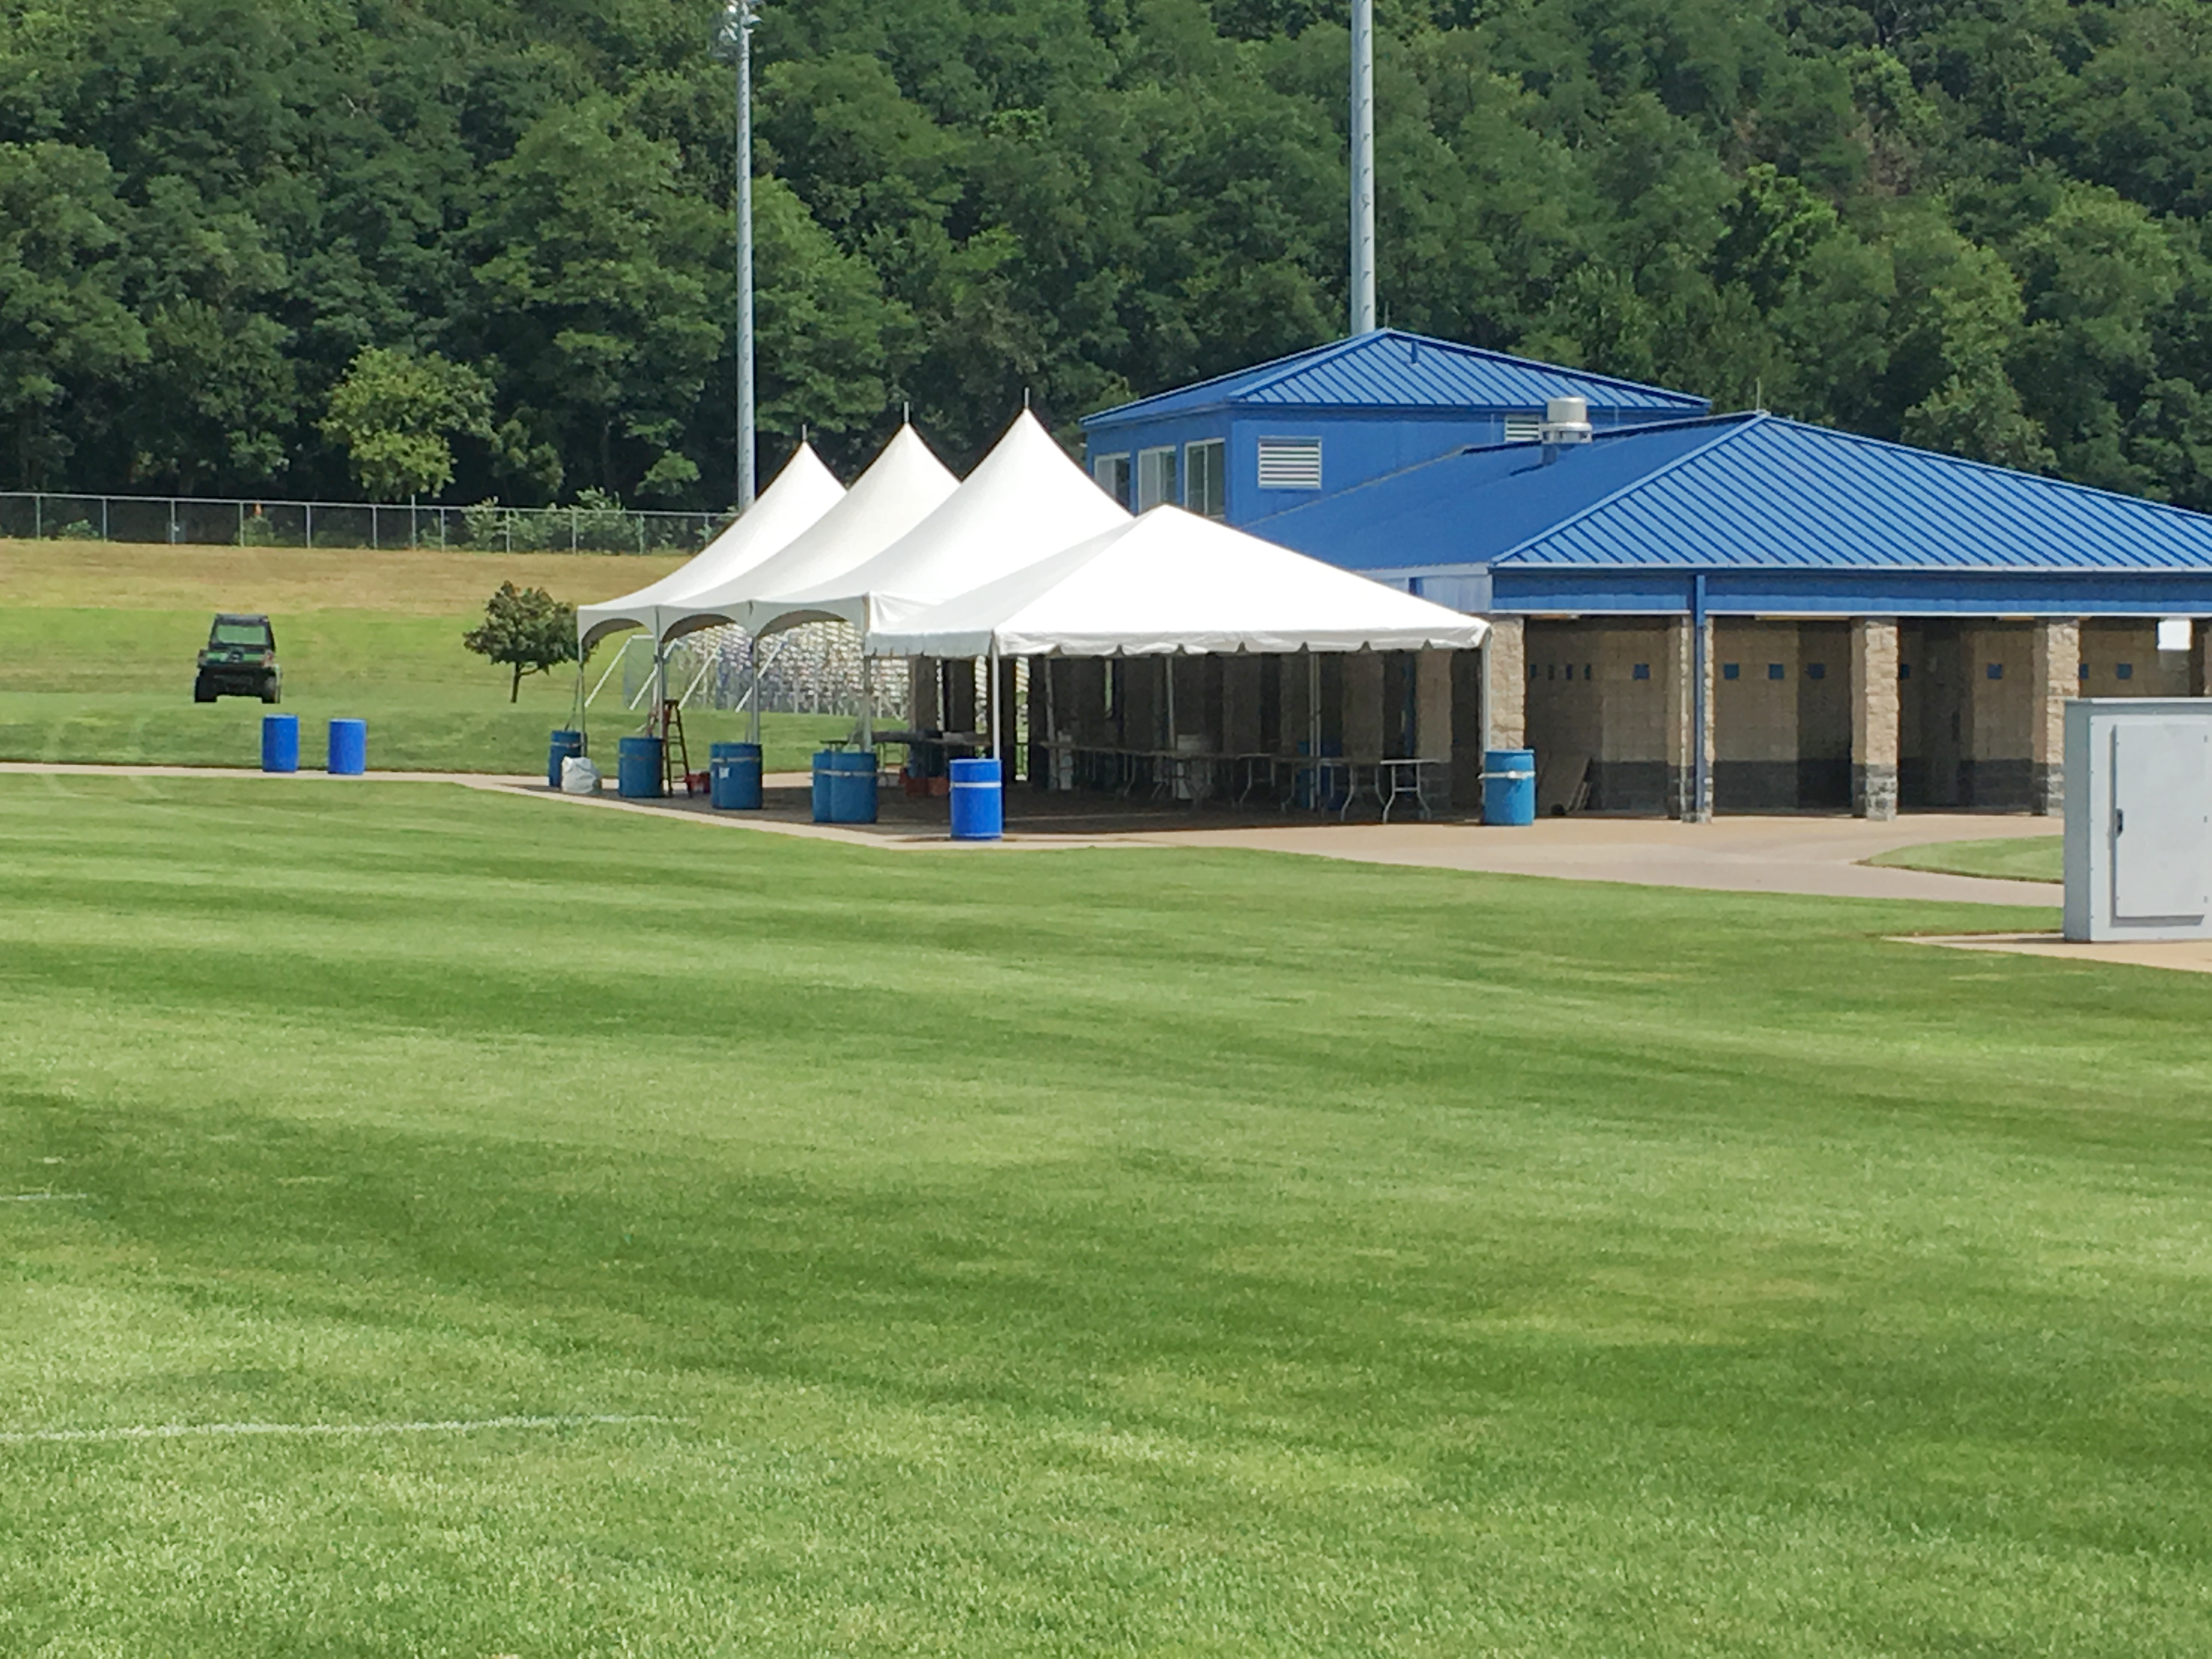 Frame tents setup at the Muscatine Soccer Complex